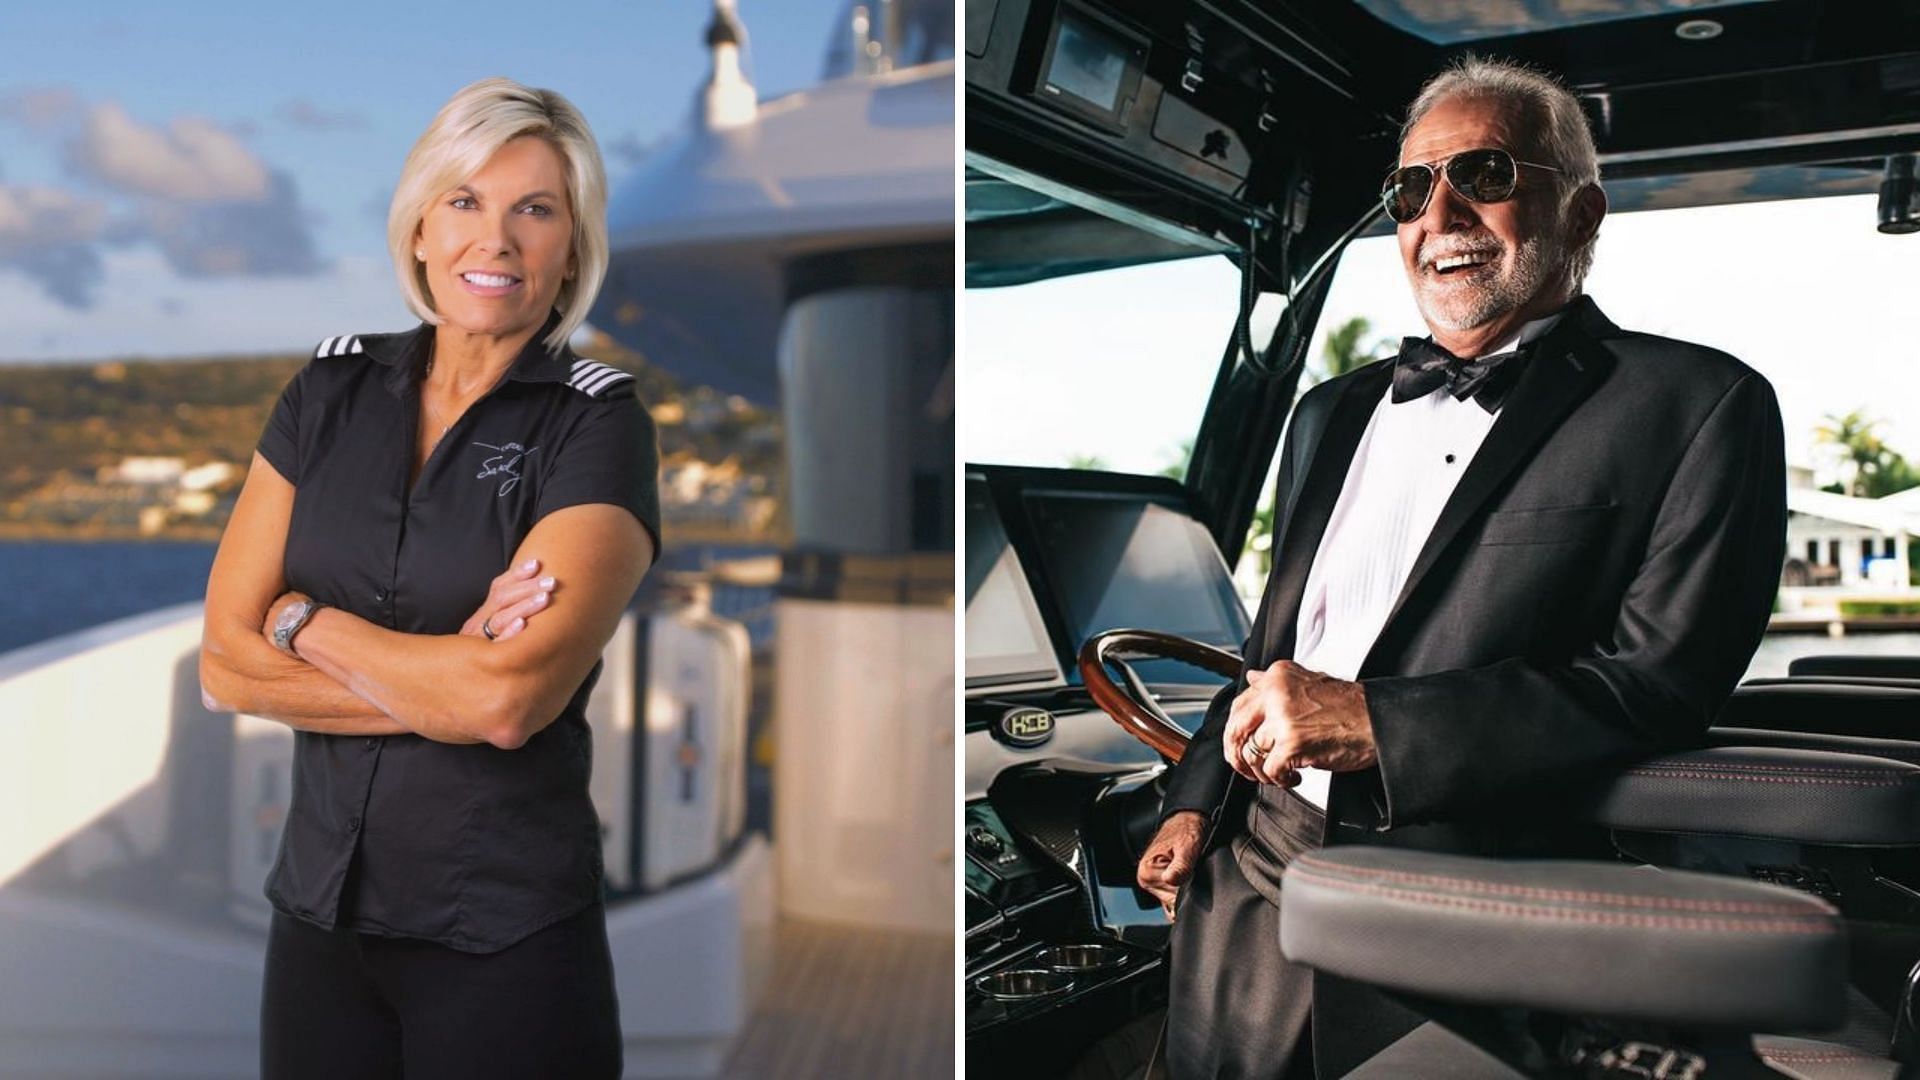 Captain Sandy Yawn replaces Captain Lee Rosbach on Below Deck